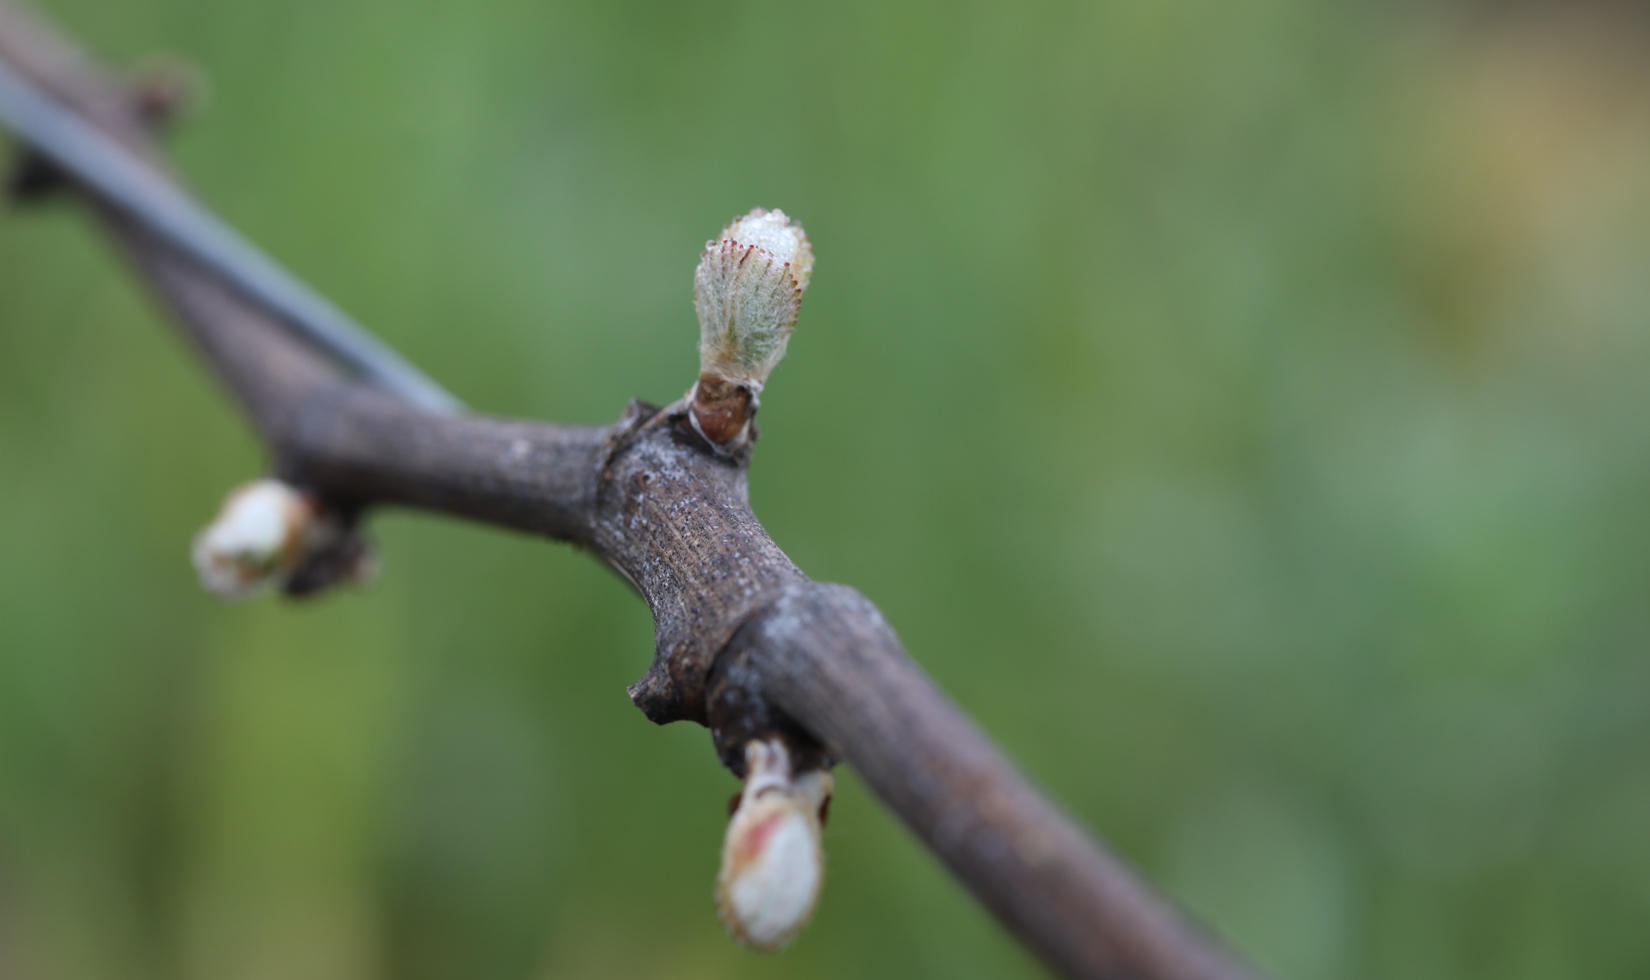 Extreme close-up of a grapevine coming towards the camera with 3 newly budding grape leaves.